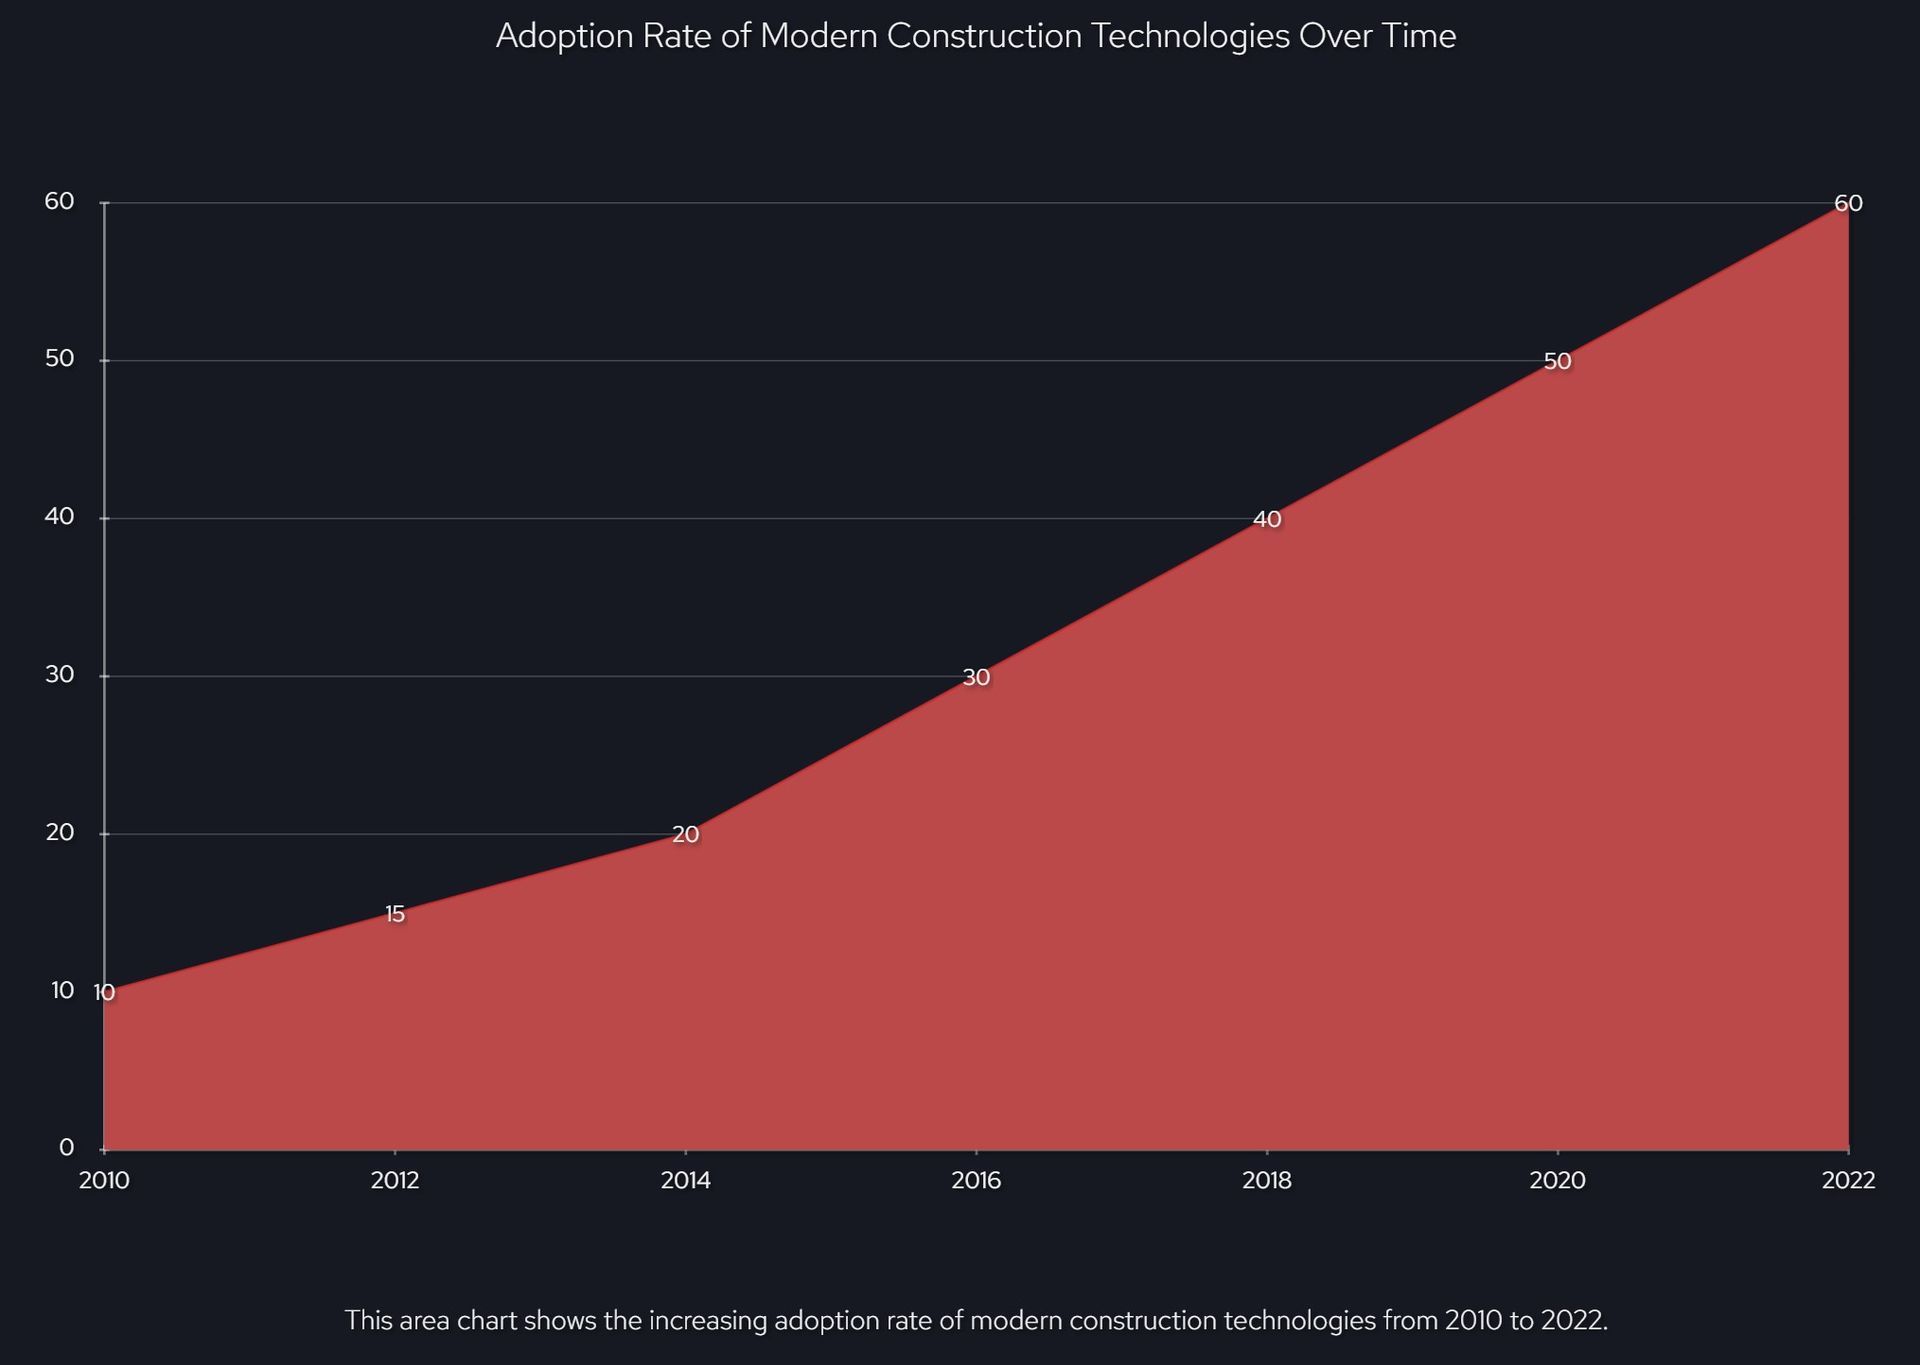 This area chart shows the increasing adoption rate of modern construction technologies from 2010 to 2022. The adoption rate has been steadily rising, indicating the growing importance of these technologies in the construction industry.